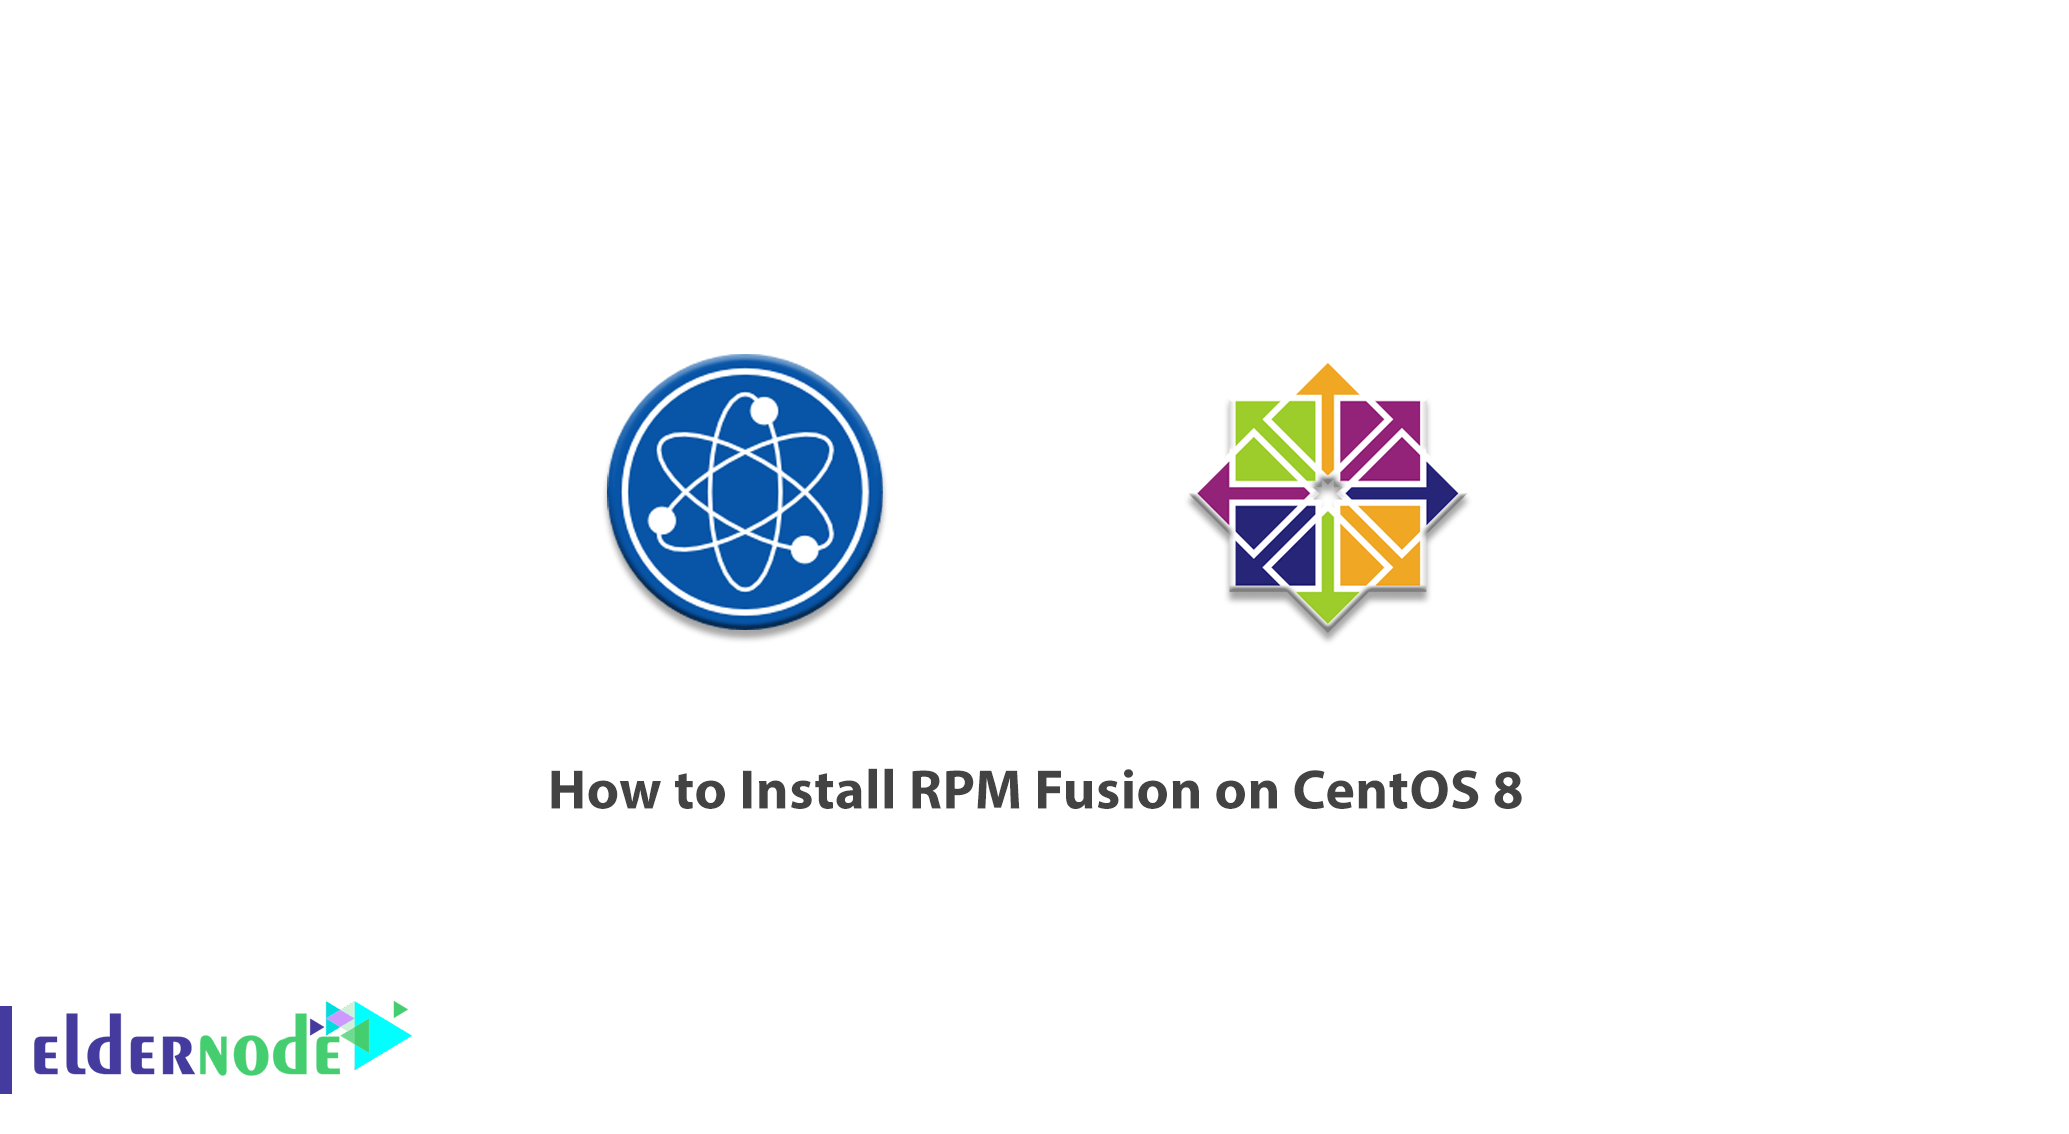 How to Install RPM Fusion on Centos 8